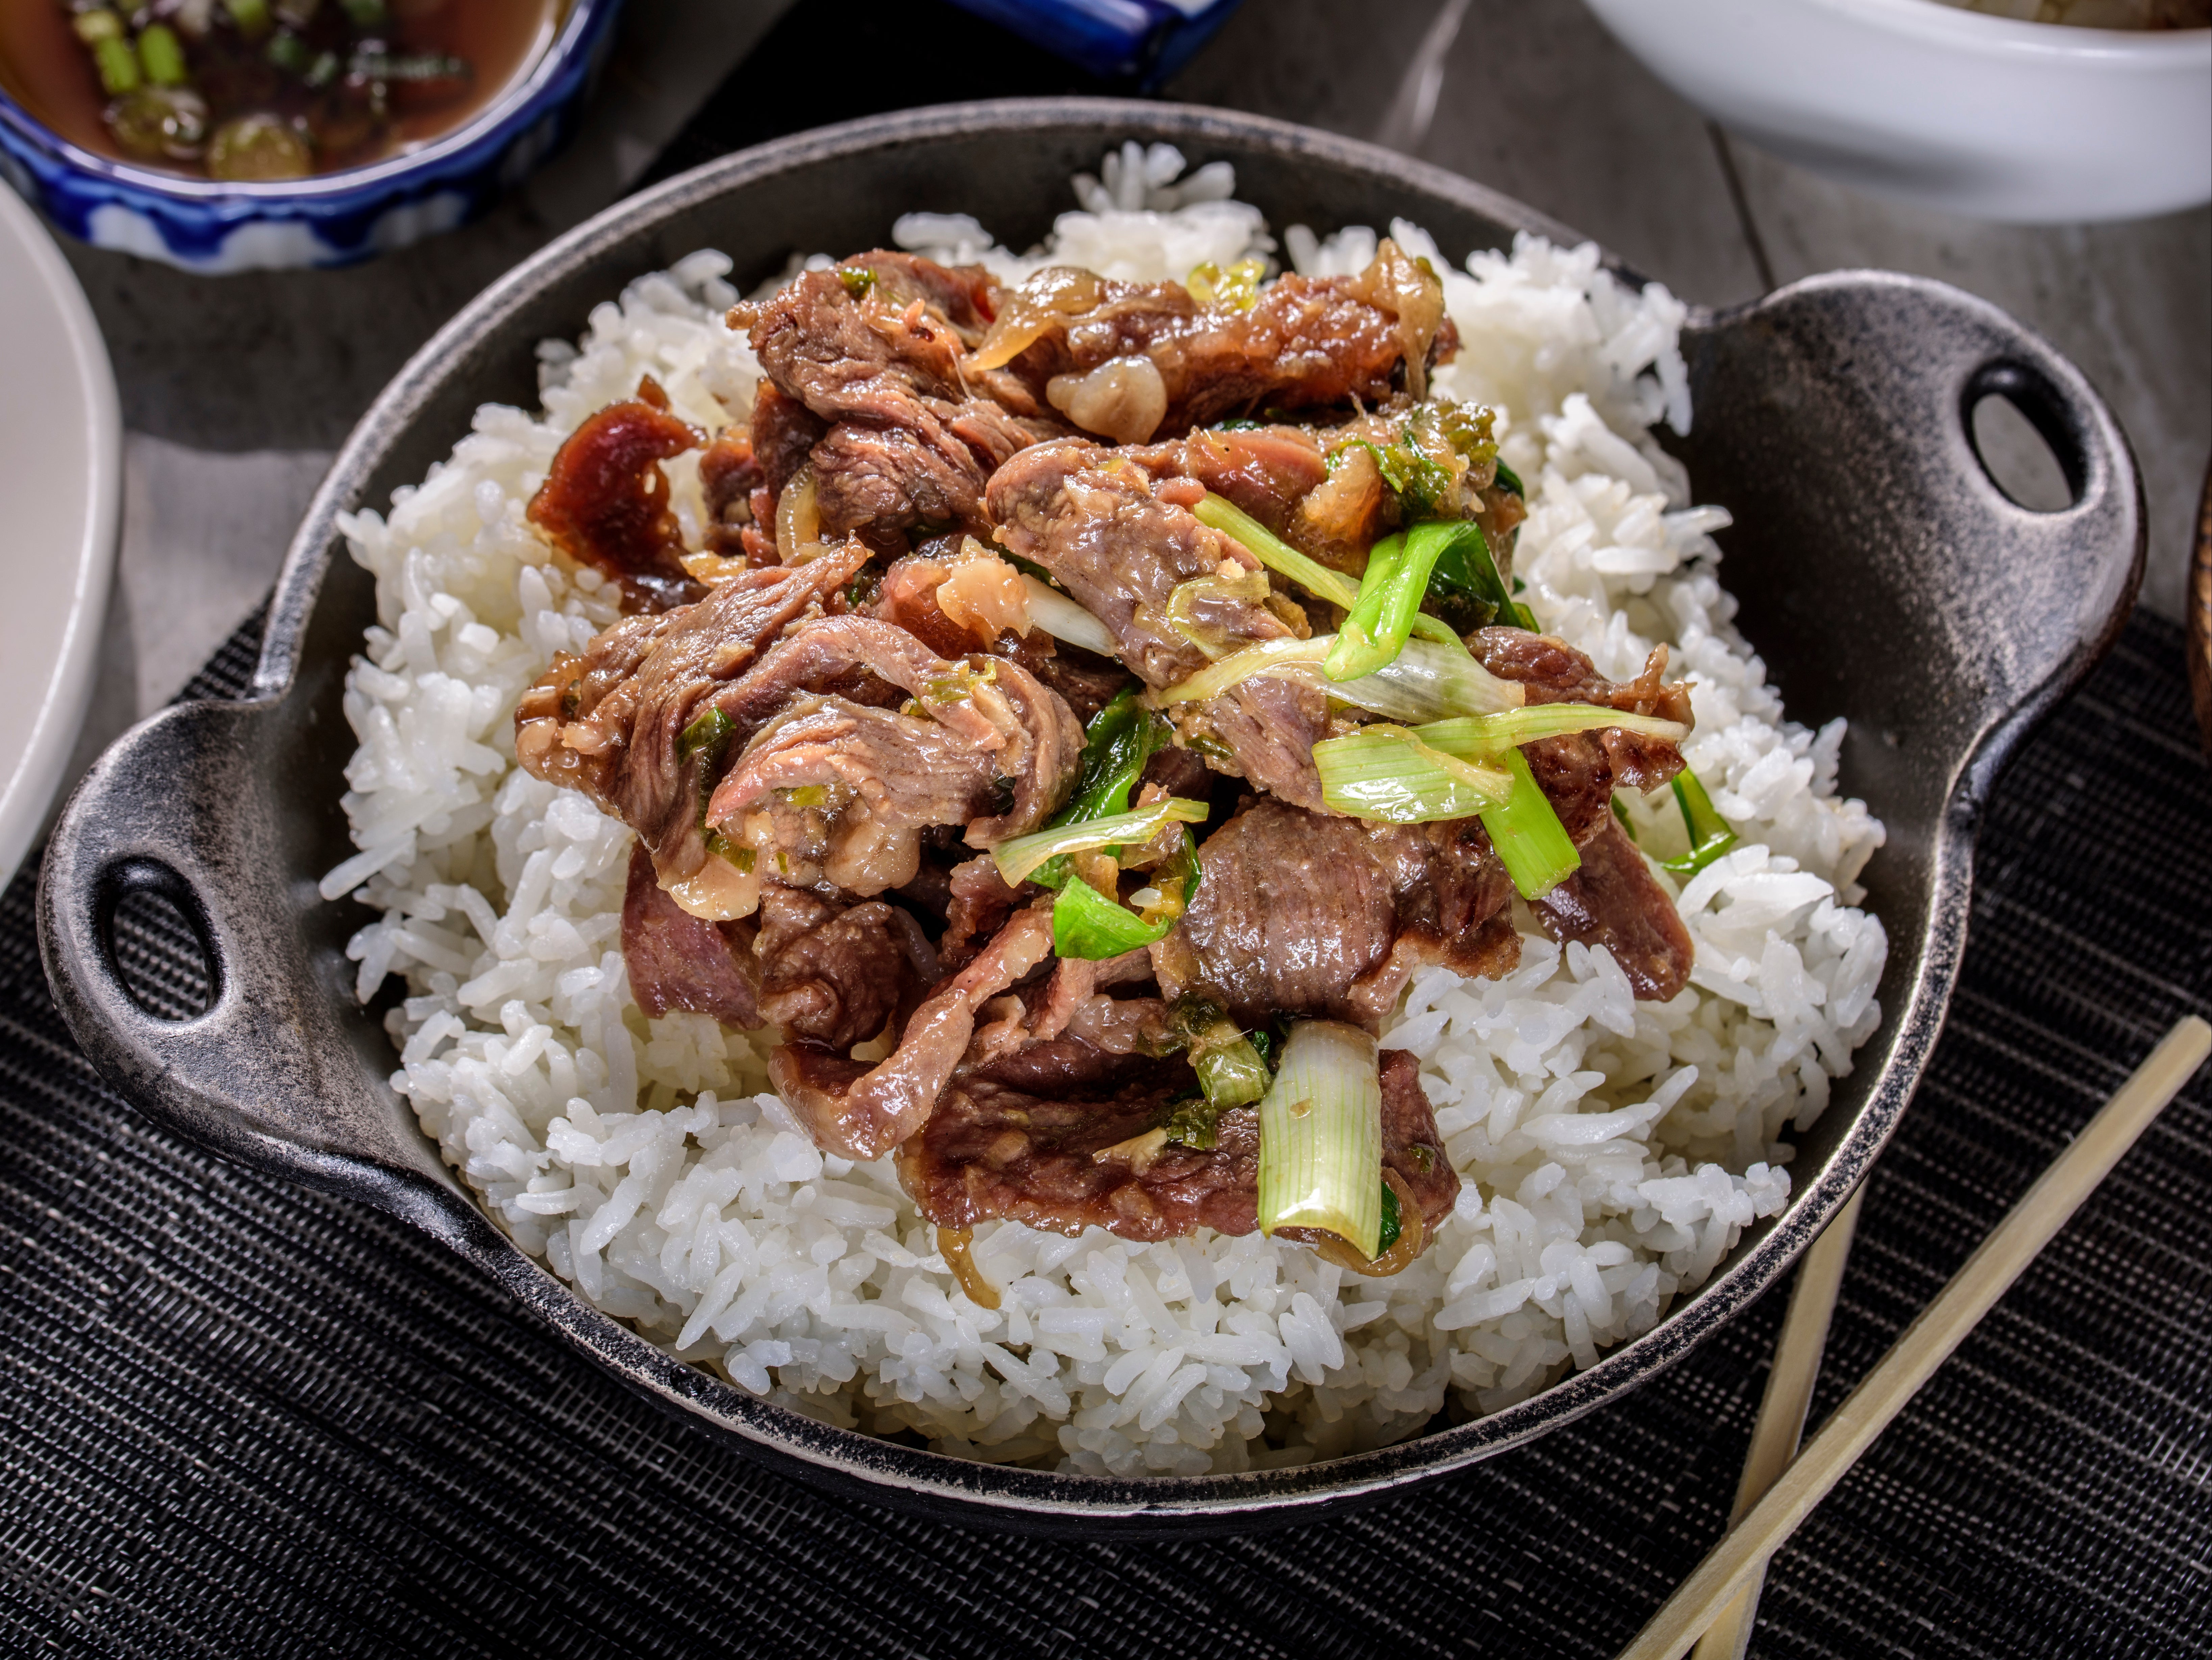 Start with this ancient Korean dish